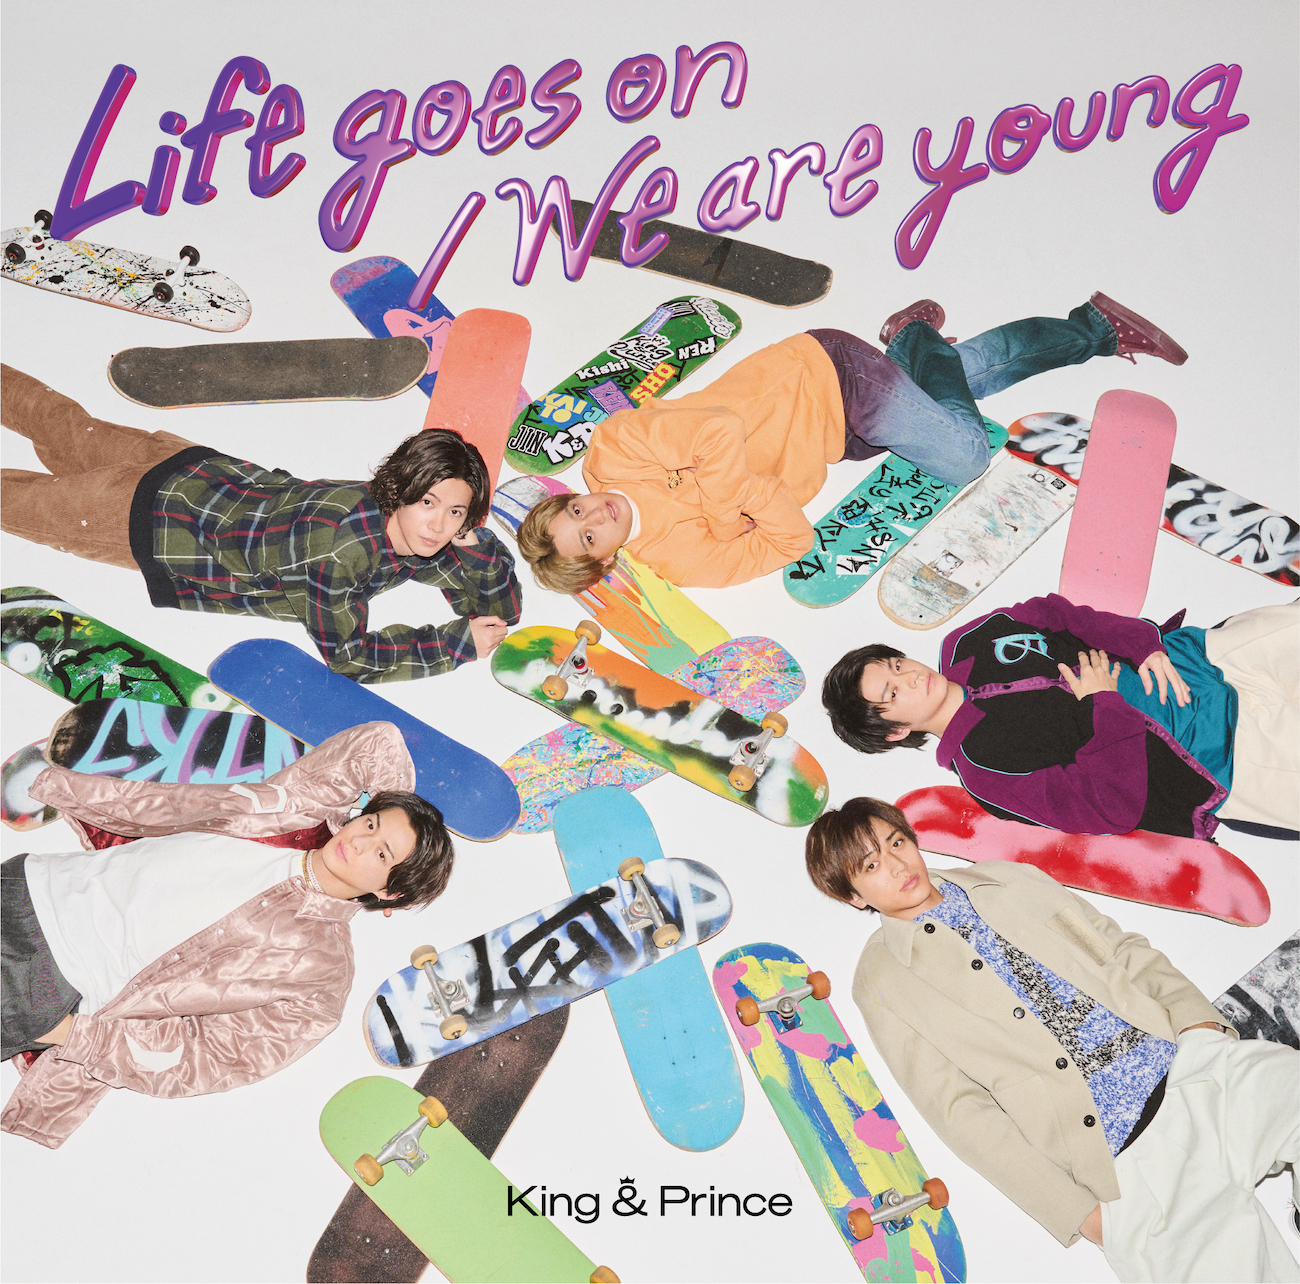 「Life goes on / We are young」通常盤